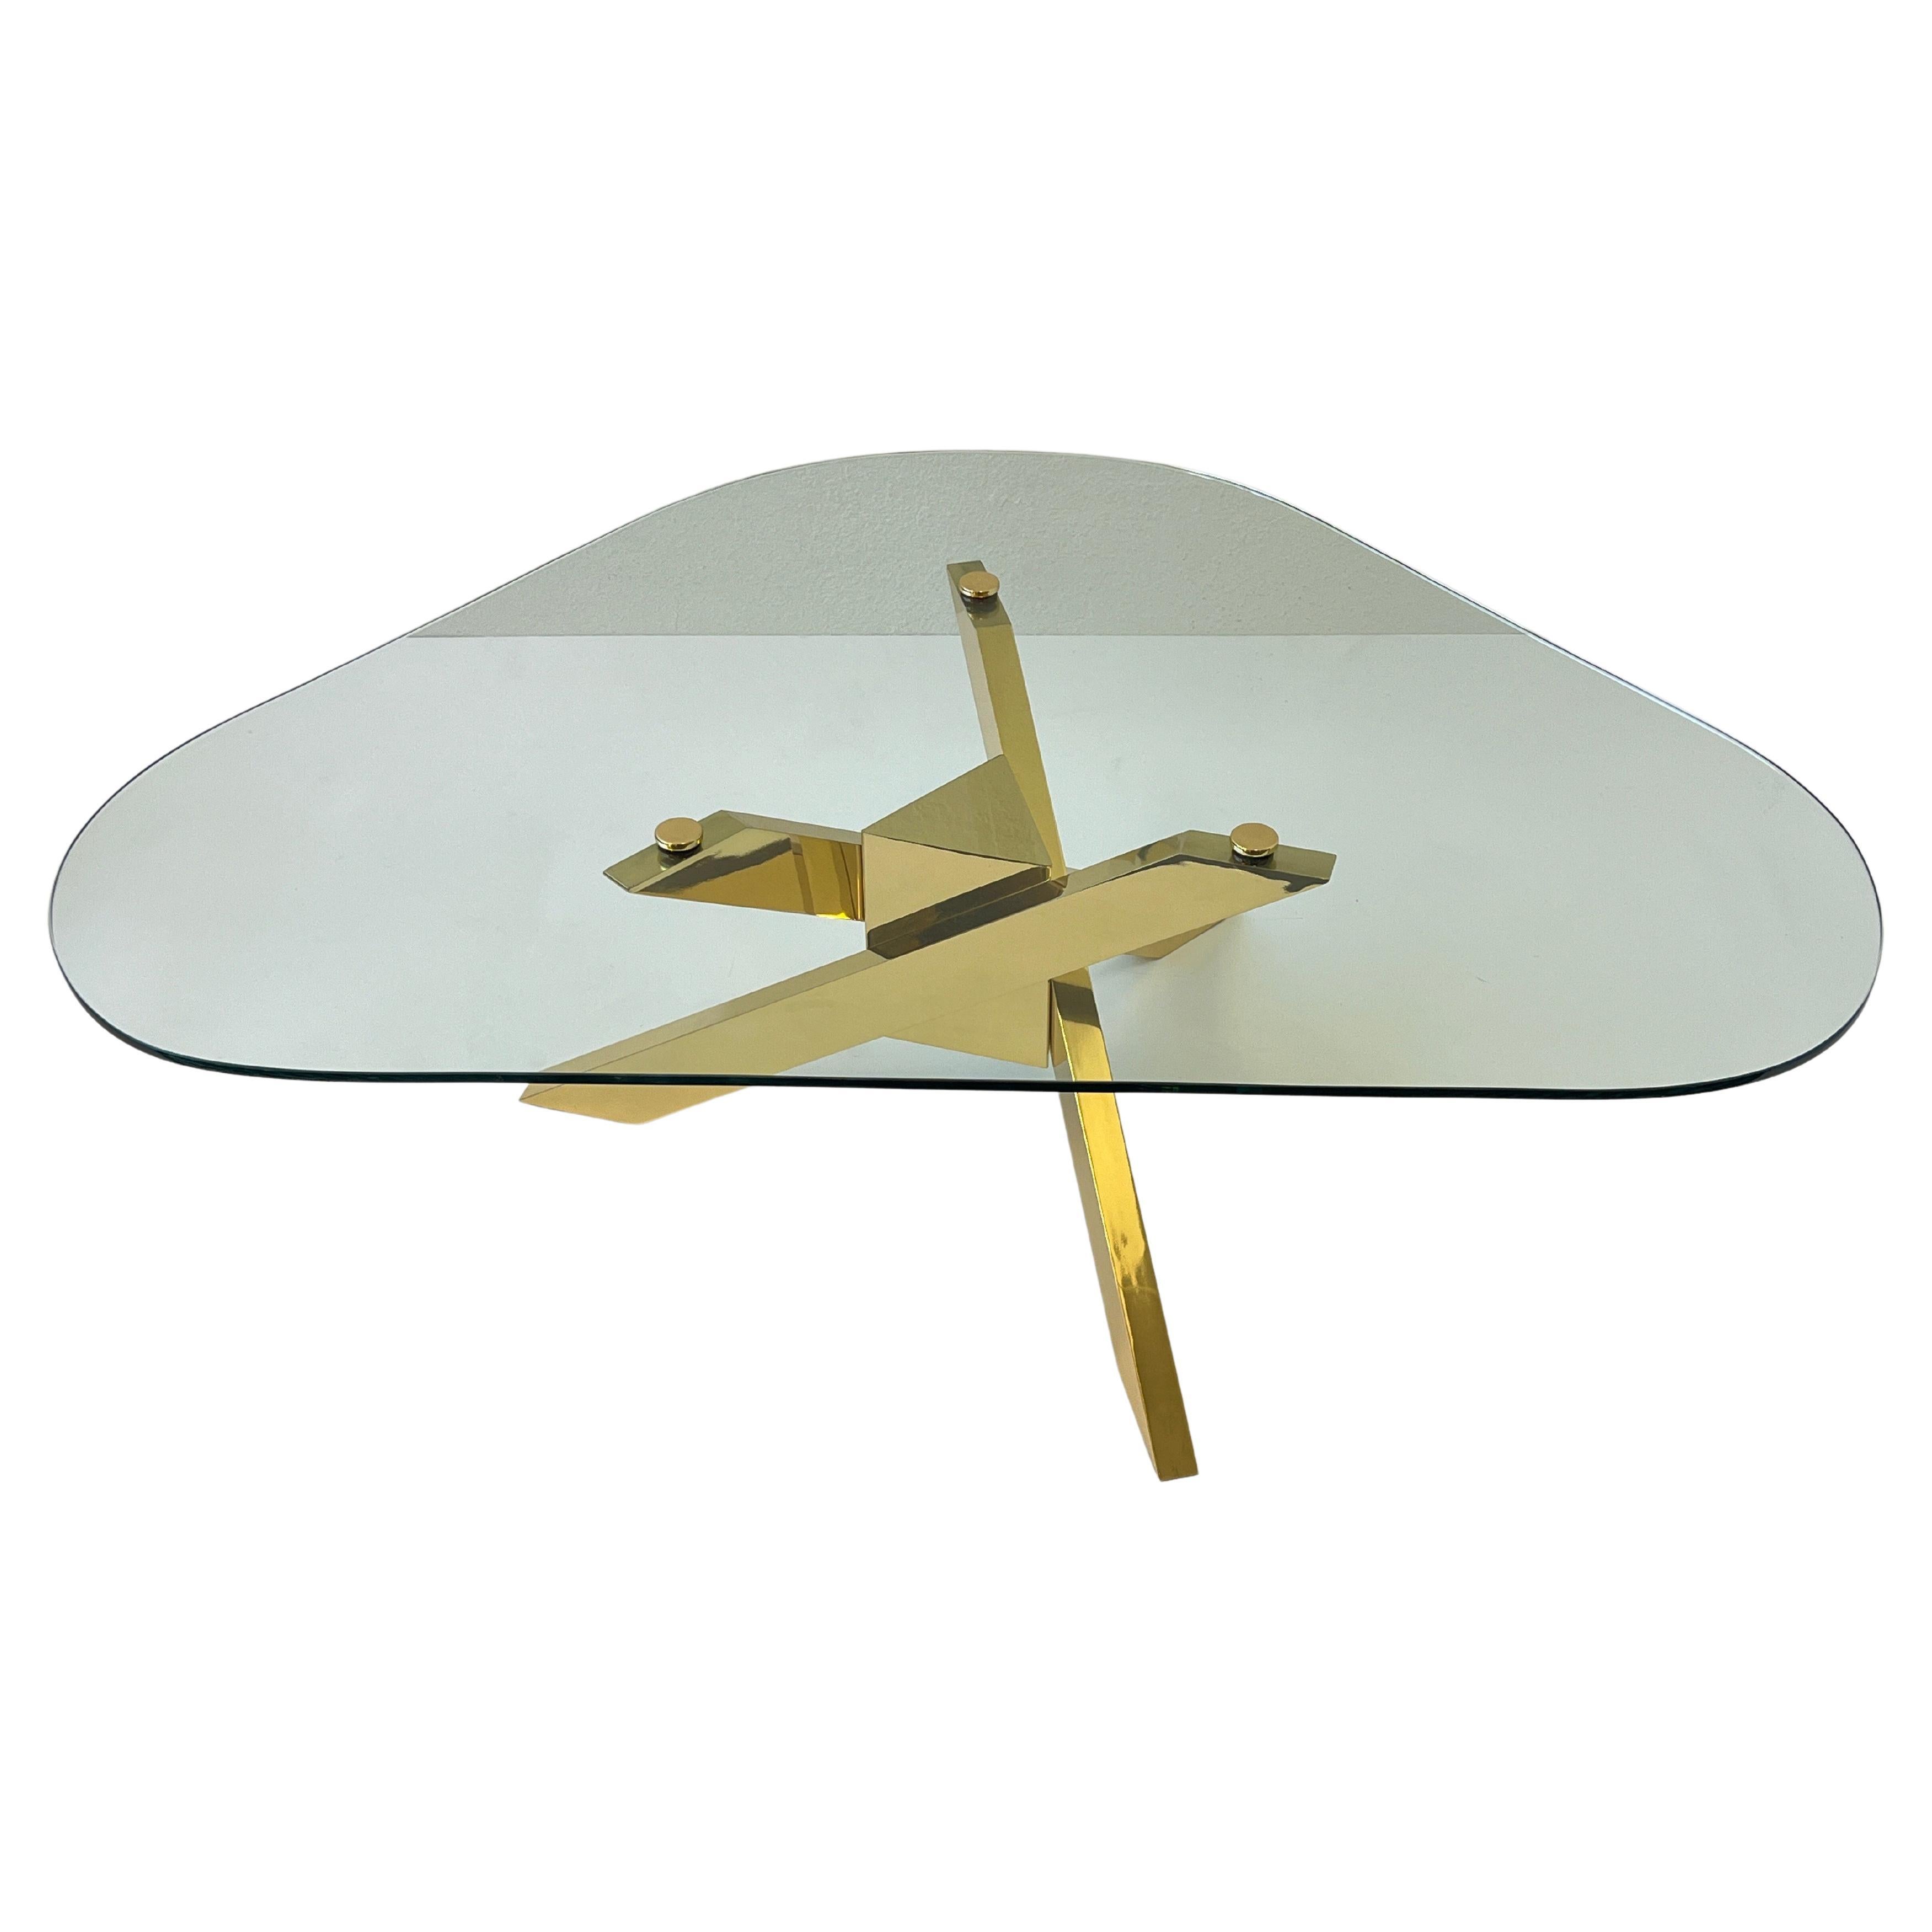 1970’s Triangular shape glass top with a polish brass tripod base cocktail table. 
The base has been newly professionally polished and lacquered. The 1/2” thick glass is original with two small scratch, consistent with age. 

Measurements: 50”